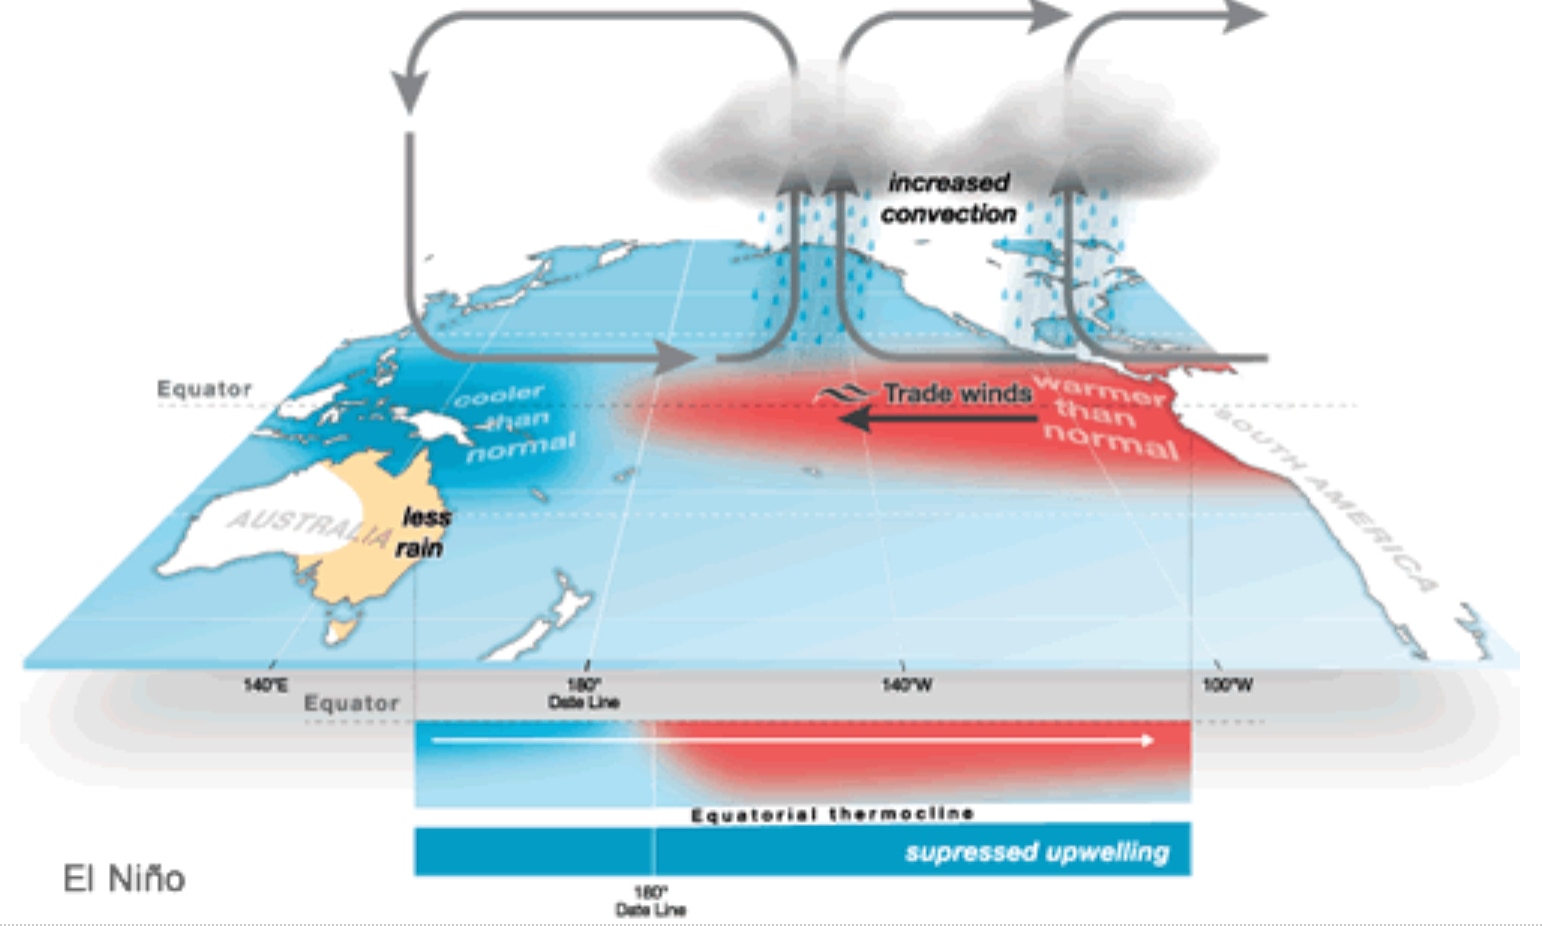 During an El Niño event, trade winds weaken, allowing the area of warmer than normal water to move into the central and eastern tropical Pacific Ocean.